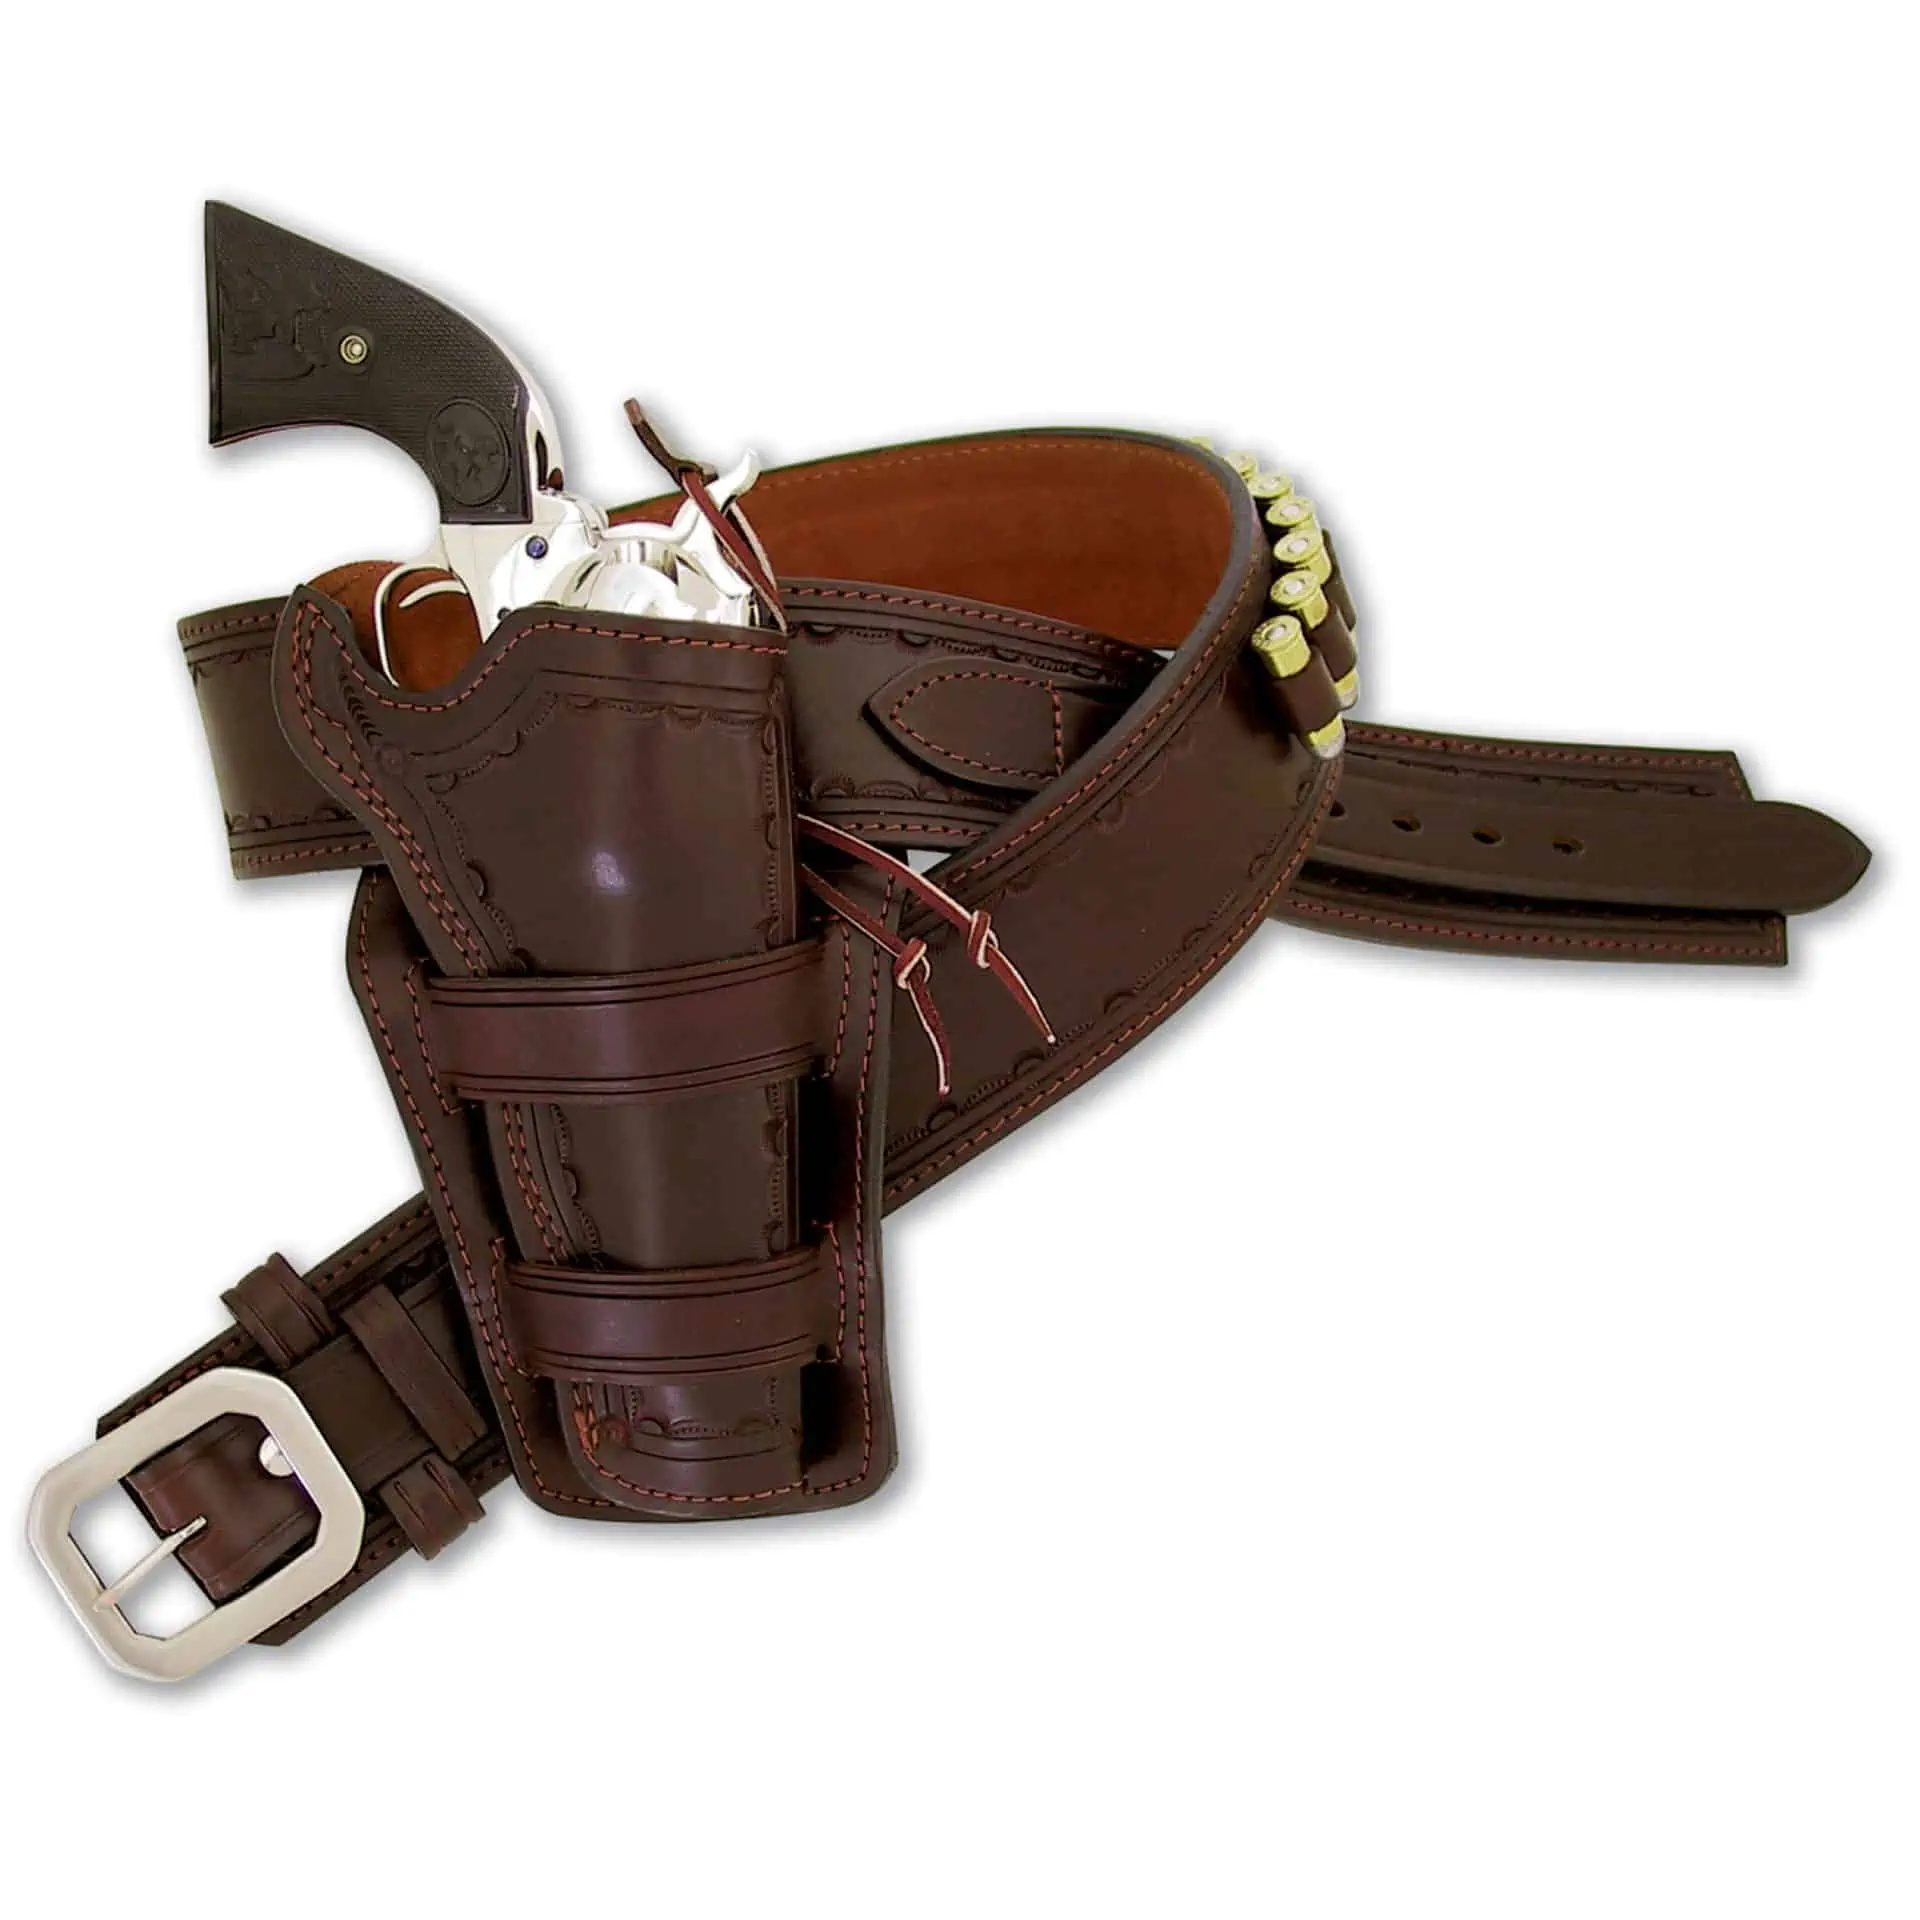 Double Action Cross Draw Holster